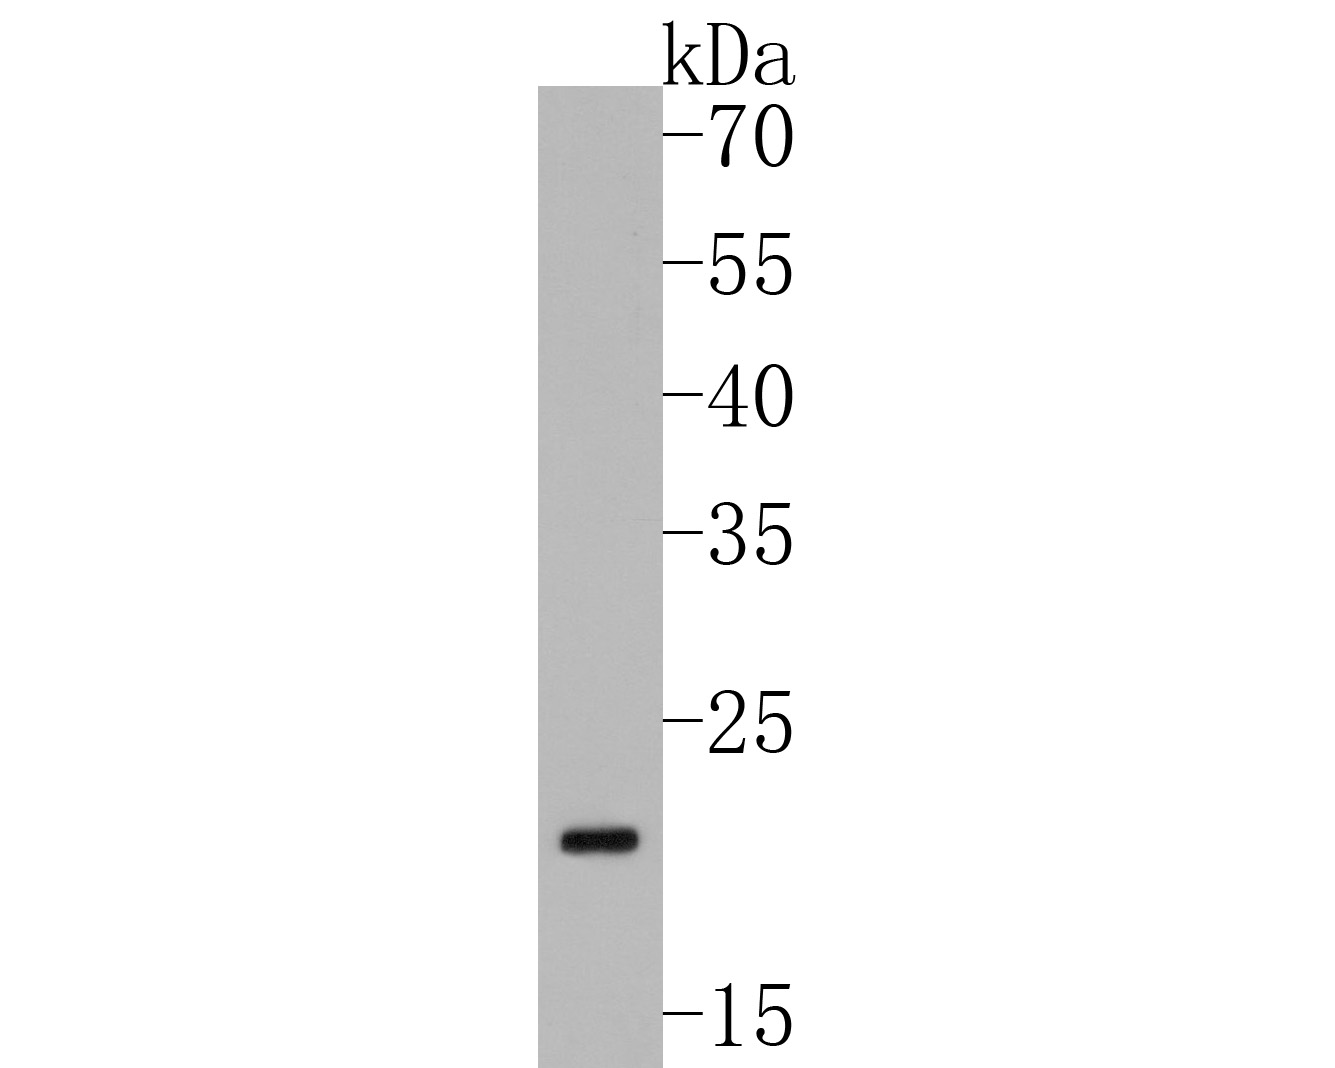 Western blot analysis of HP1 gamma on mouse colon tissue lysates. Proteins were transferred to a PVDF membrane and blocked with 5% BSA in PBS for 1 hour at room temperature. The primary antibody (ET1706-02, 1/500) was used in 5% BSA at room temperature for 2 hours. Goat Anti-Rabbit IgG - HRP Secondary Antibody (HA1001) at 1:200,000 dilution was used for 1 hour at room temperature.